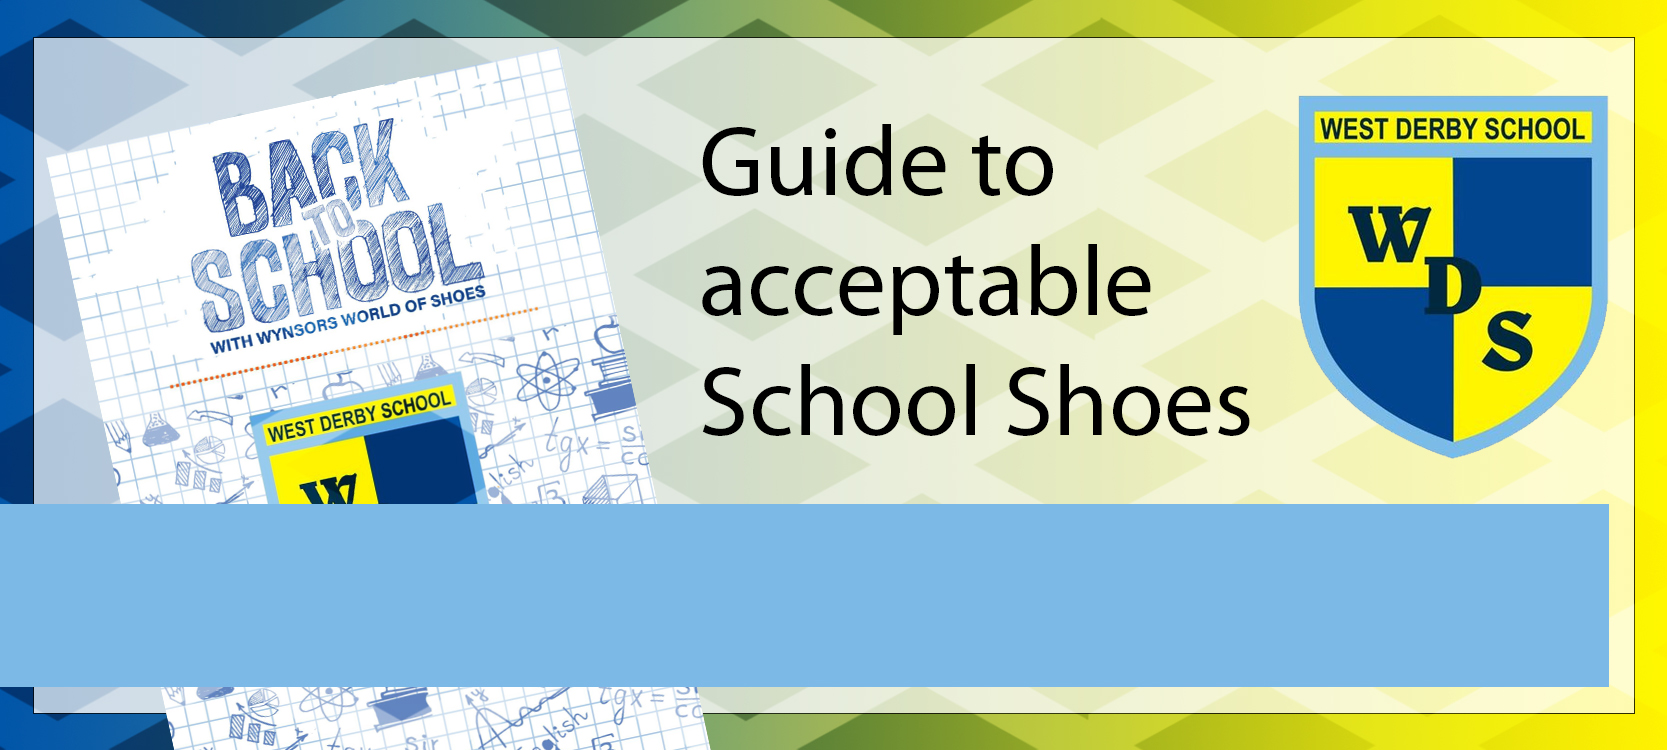 View our guide to acceptable School Shoes